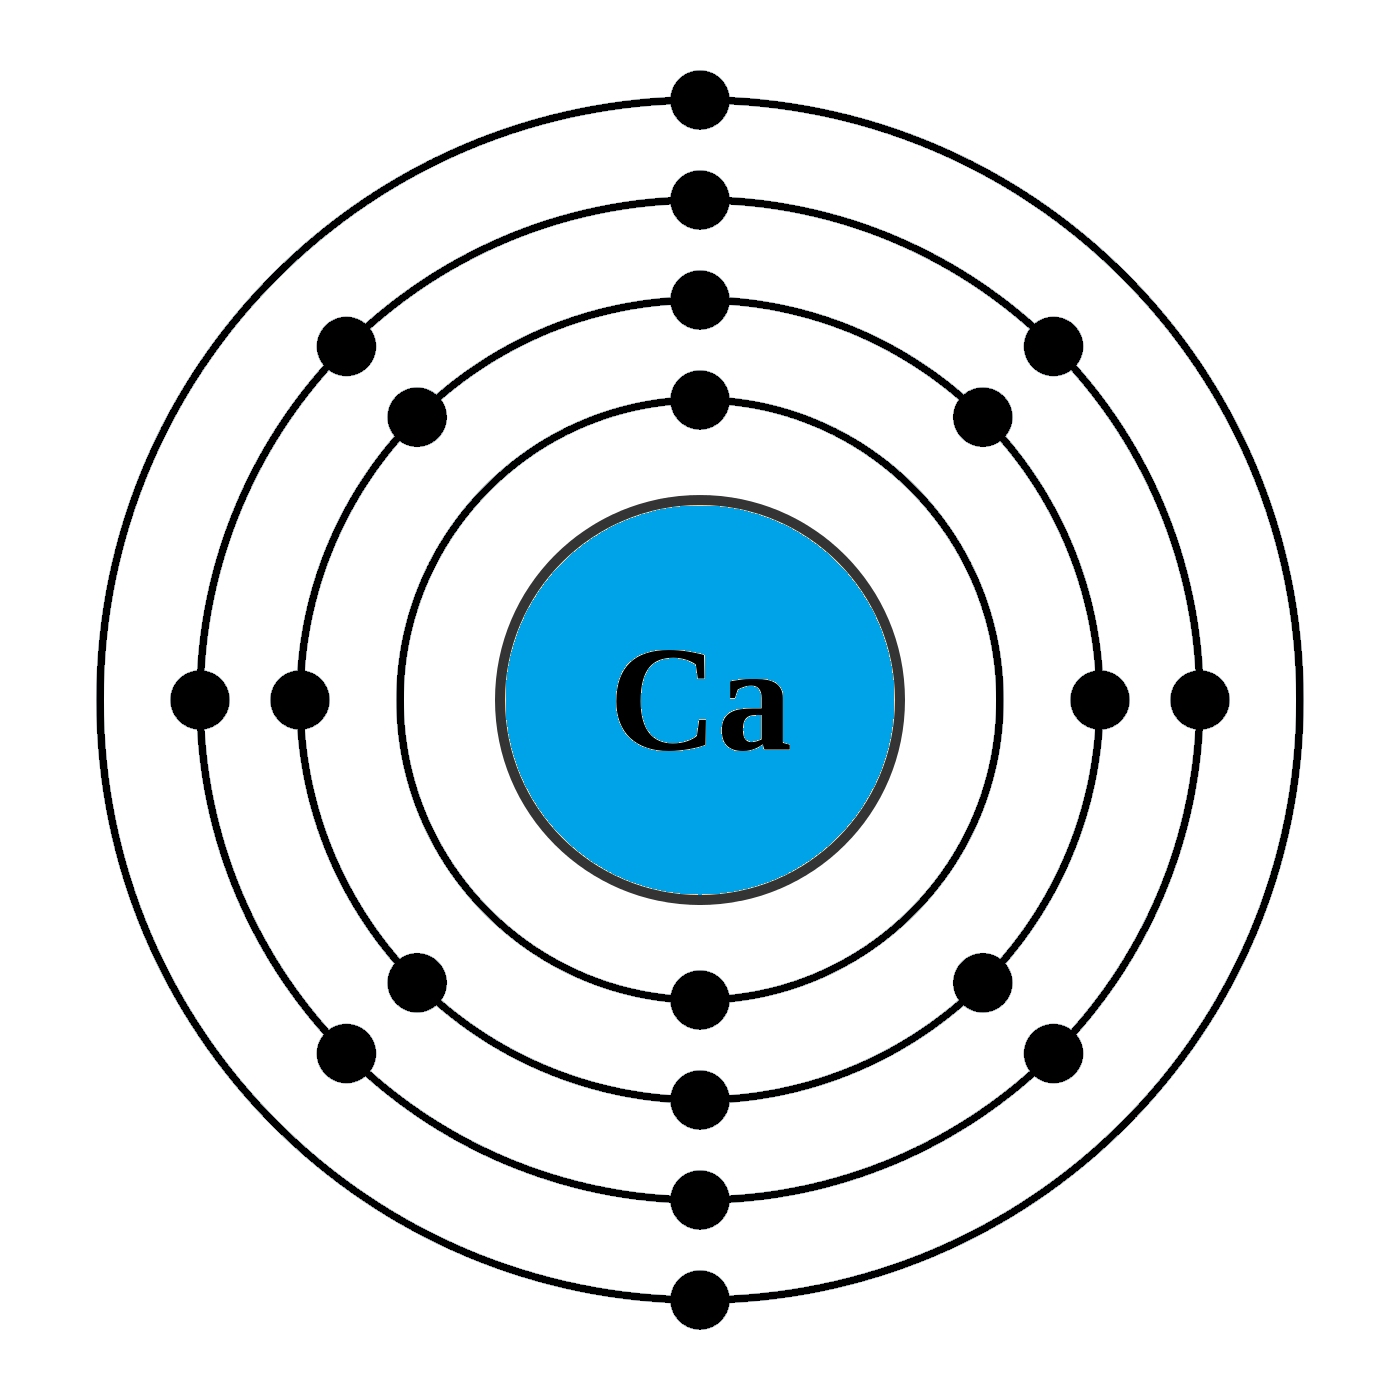 How can I draw electronic configuration of calcium in a shell nxwe70dd